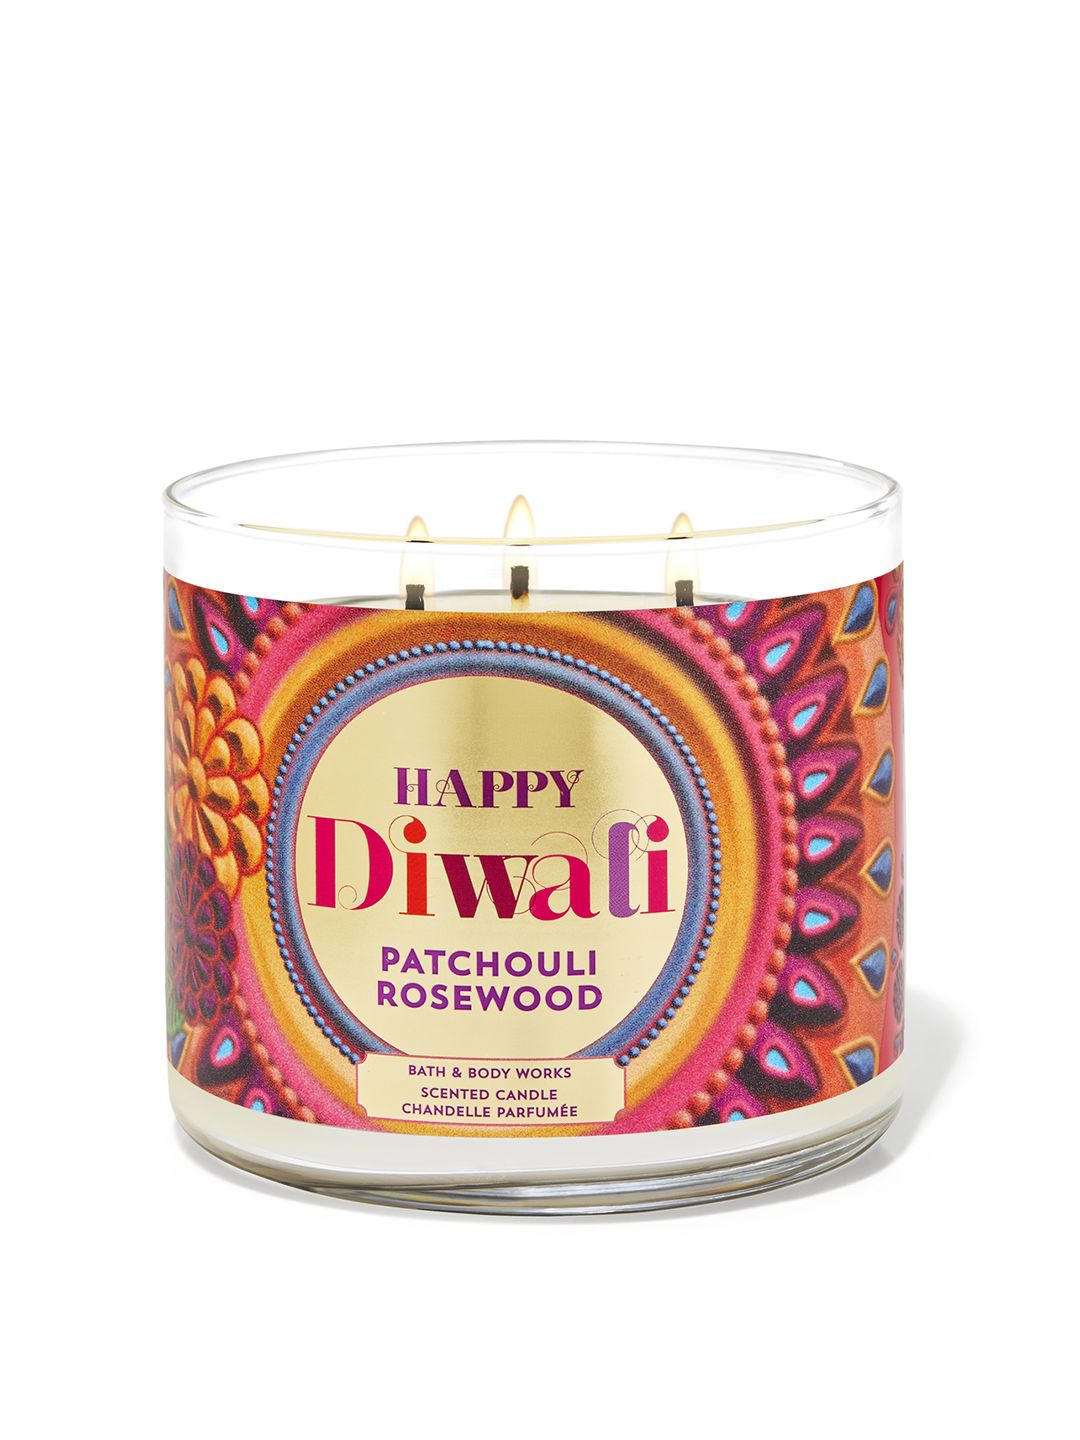 Bath & Body Works Happy Diwali Patchouli Rosewood 3-Wick Scented Candle - 411g Price in India